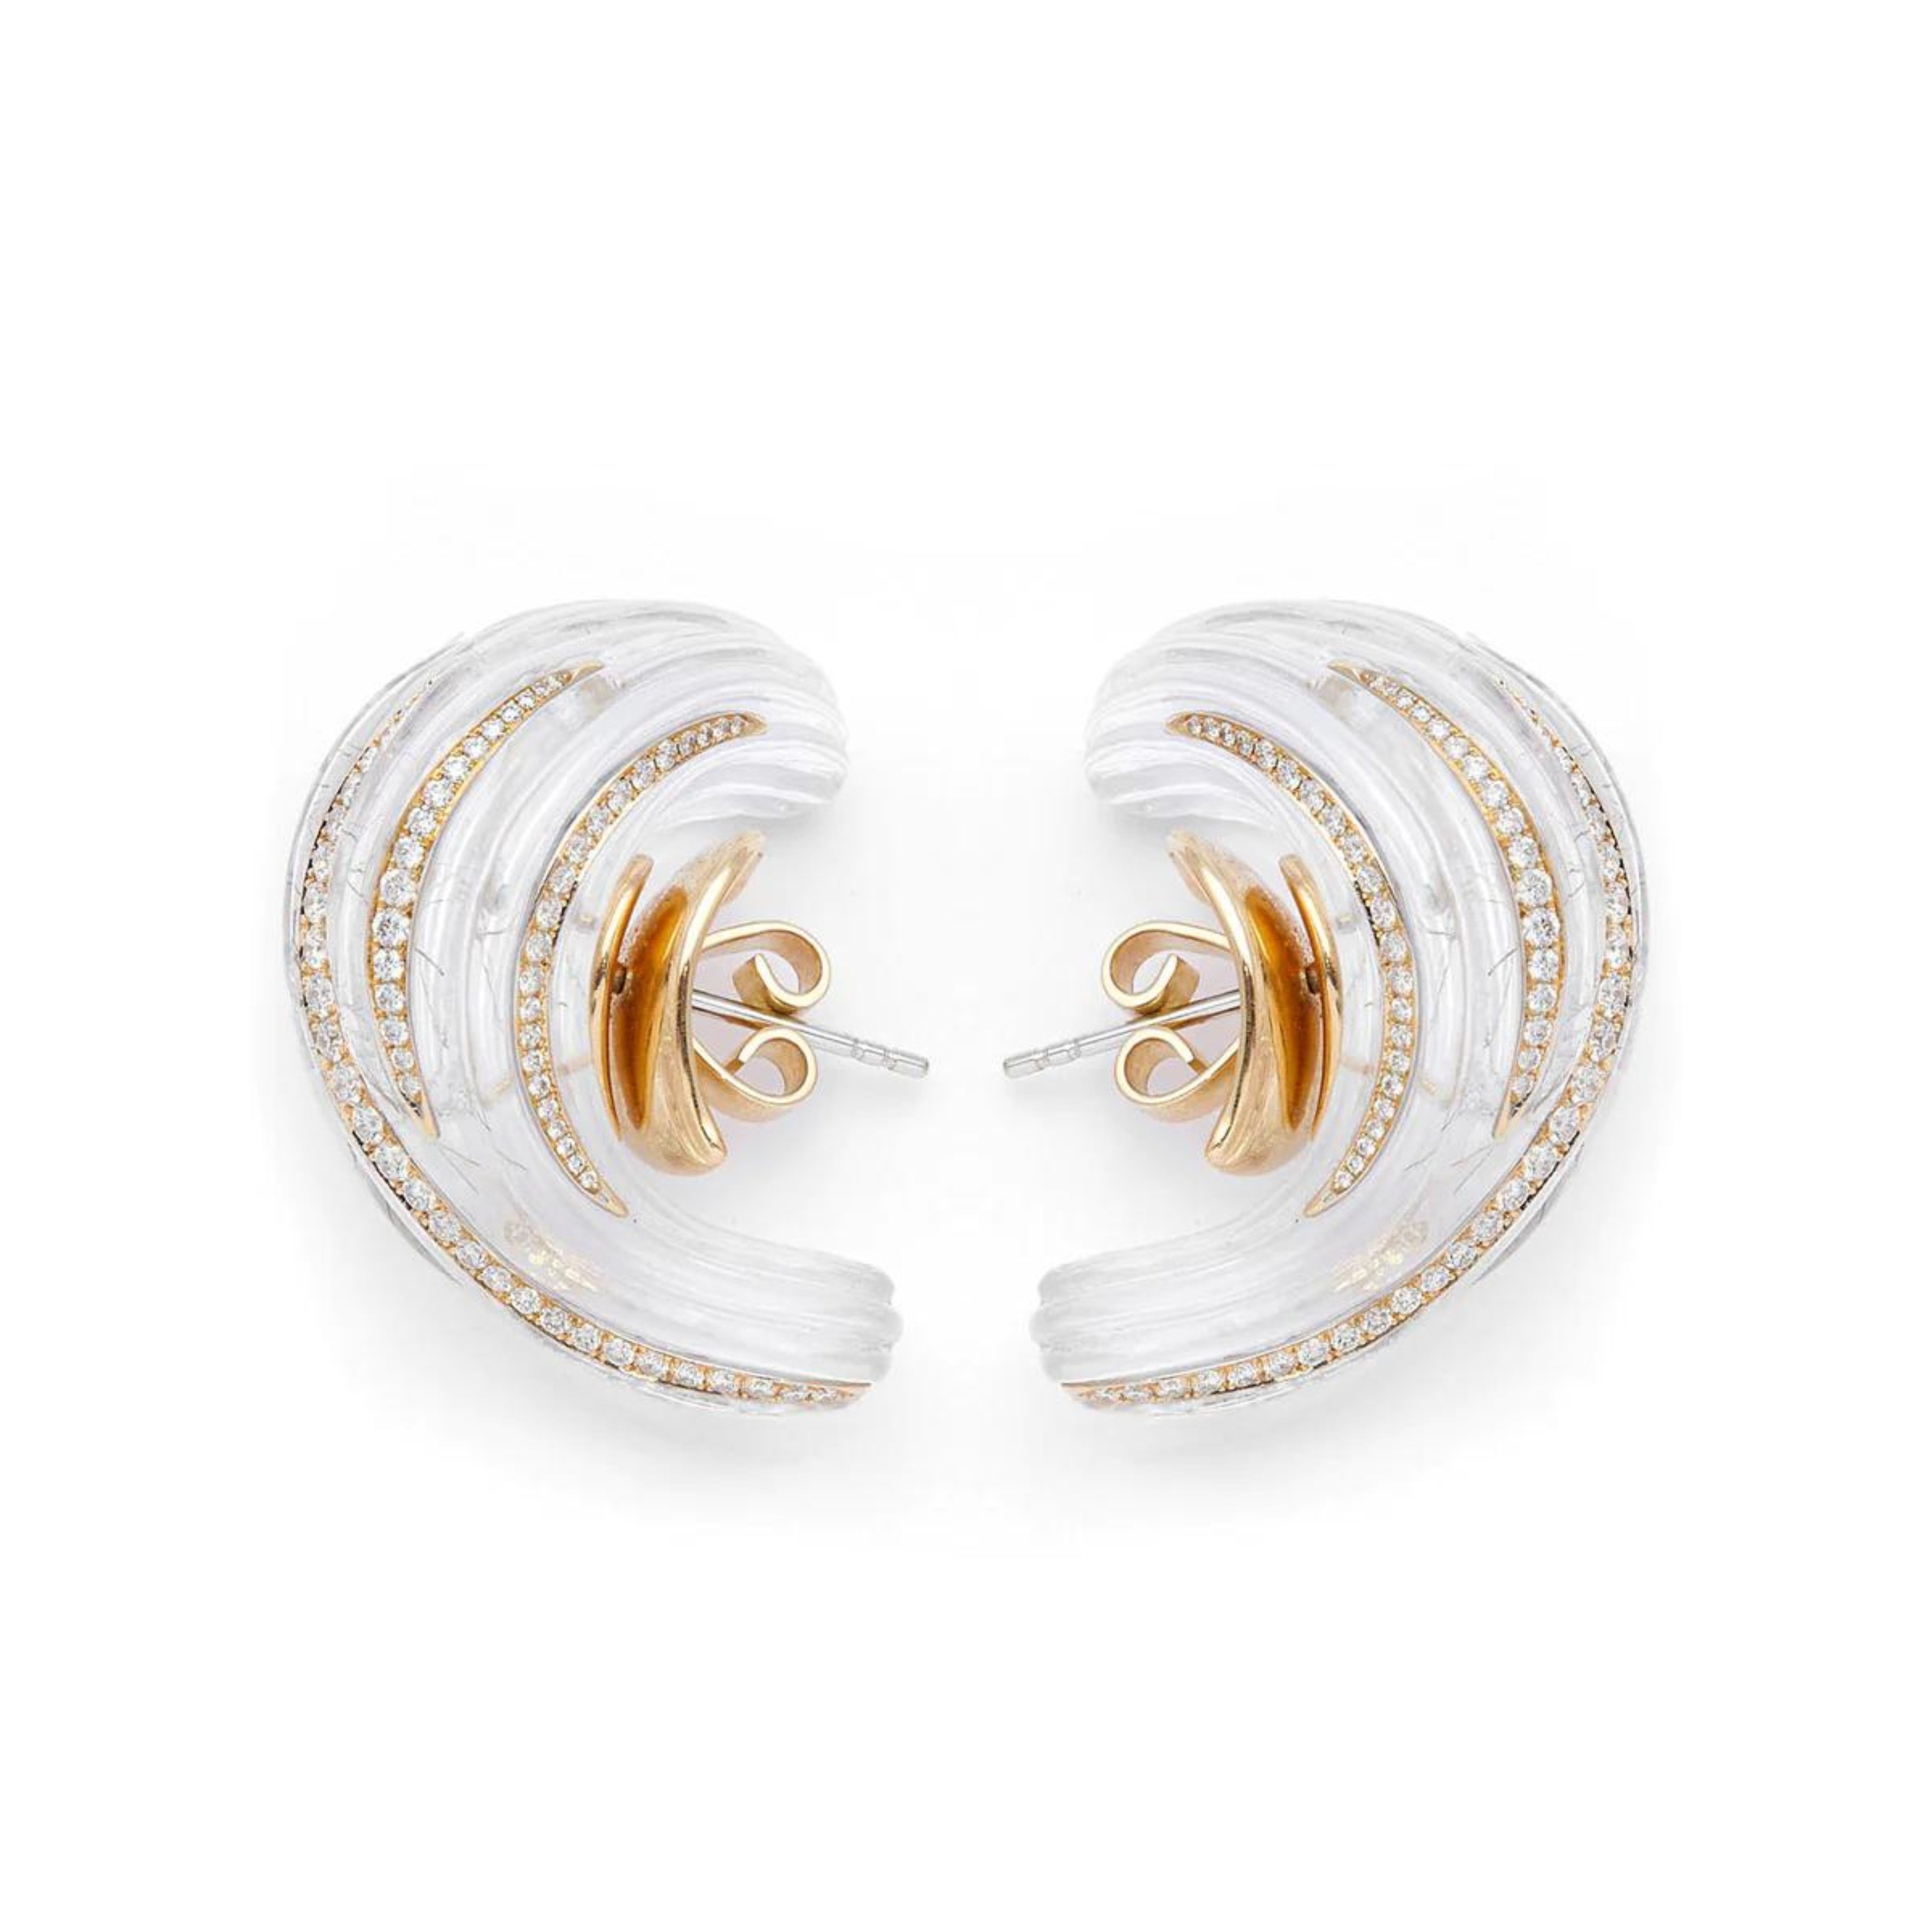 Bibi van der Velden Tidal Wave Earrings crafted with an 18K yellow gold base and accents, white diamonds, and rutile quartz. They are designed to evoke the powerful surge and delicate sparkle of a tidal wave. Side view.